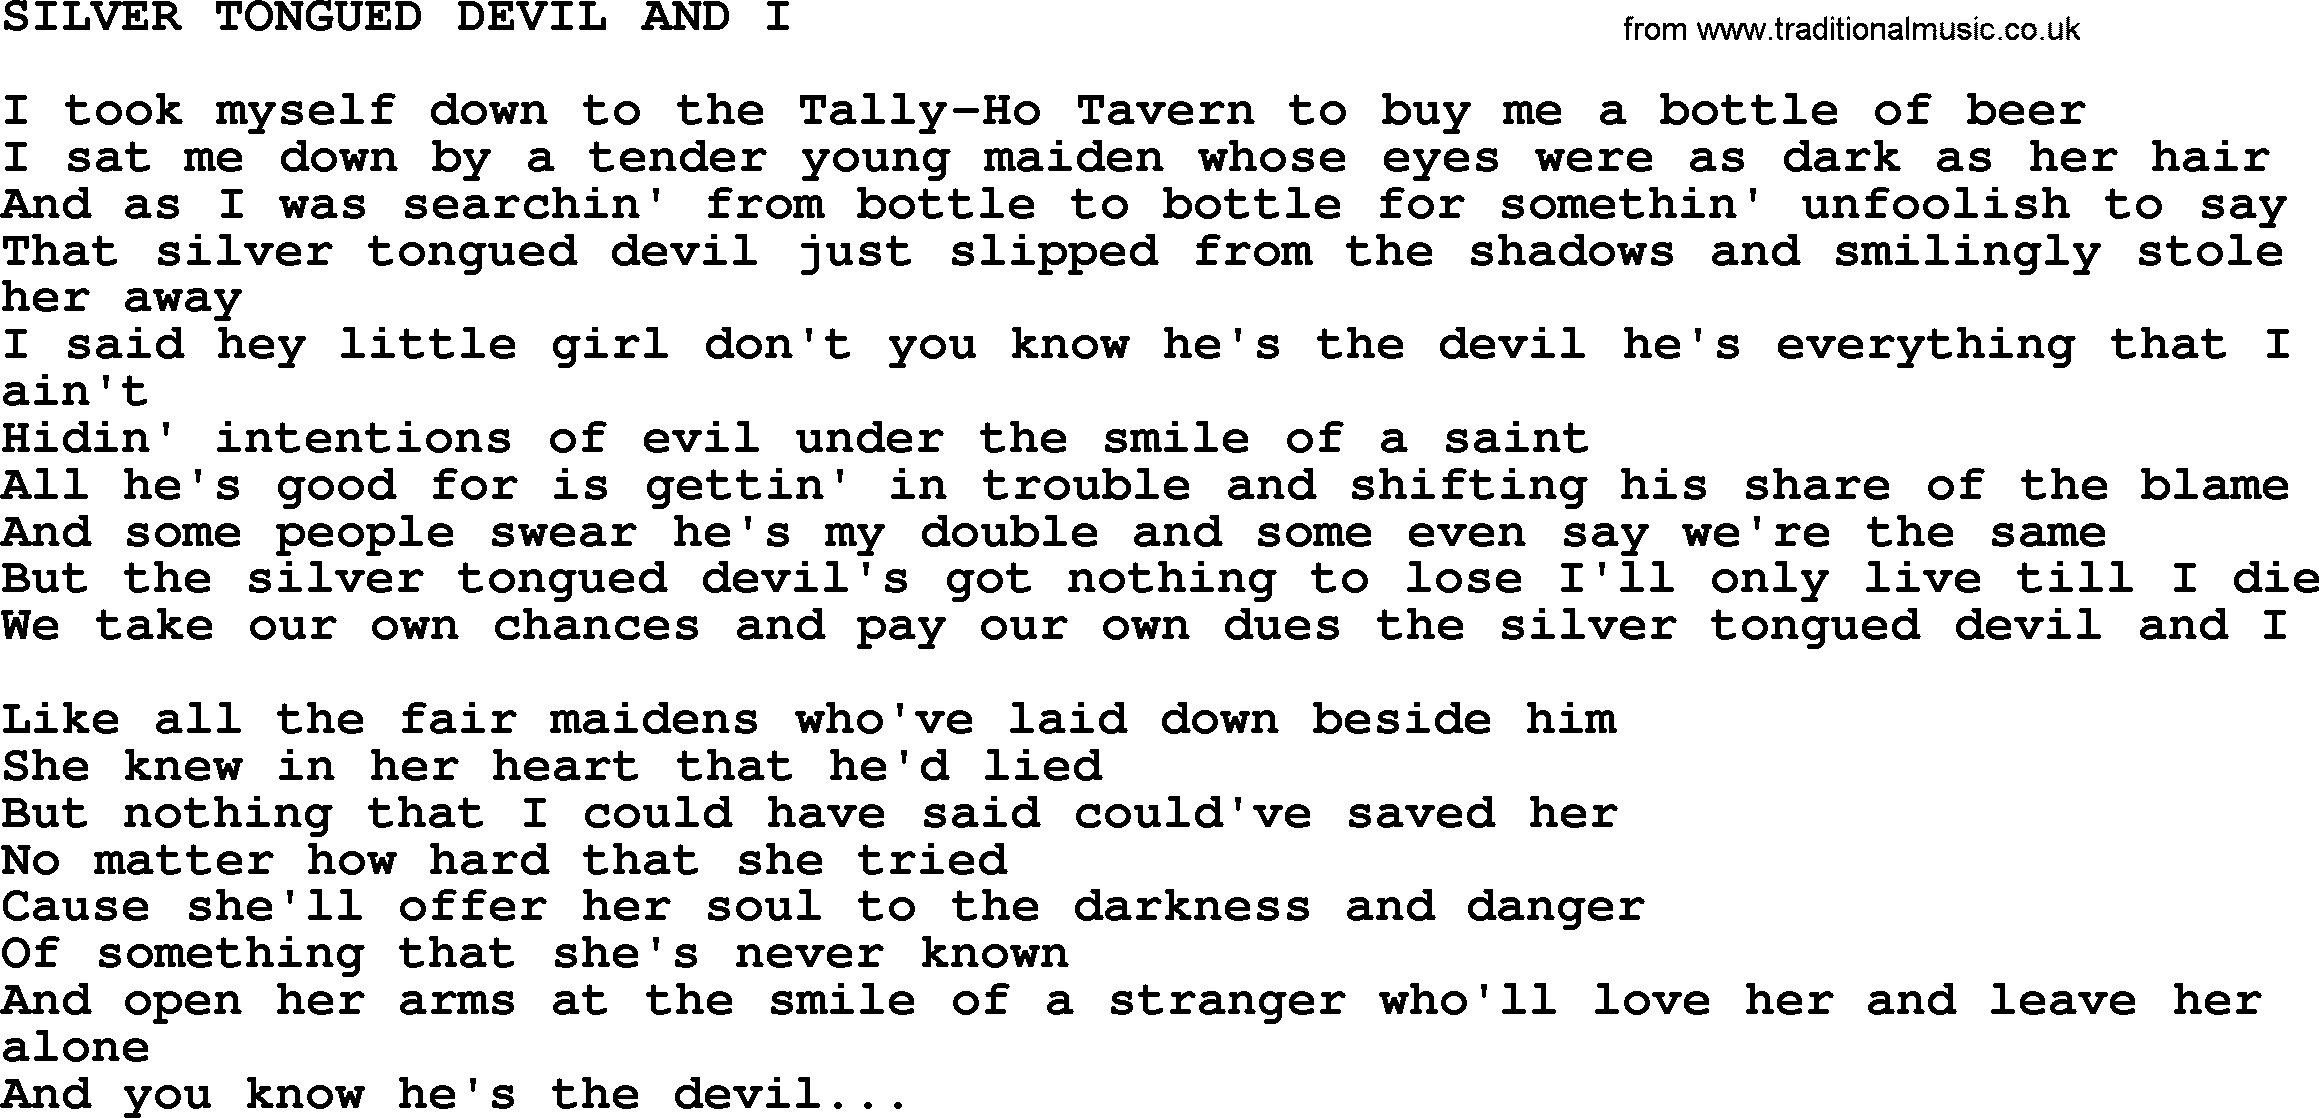 Kris Kristofferson song: Silver Tongued Devil And I lyrics